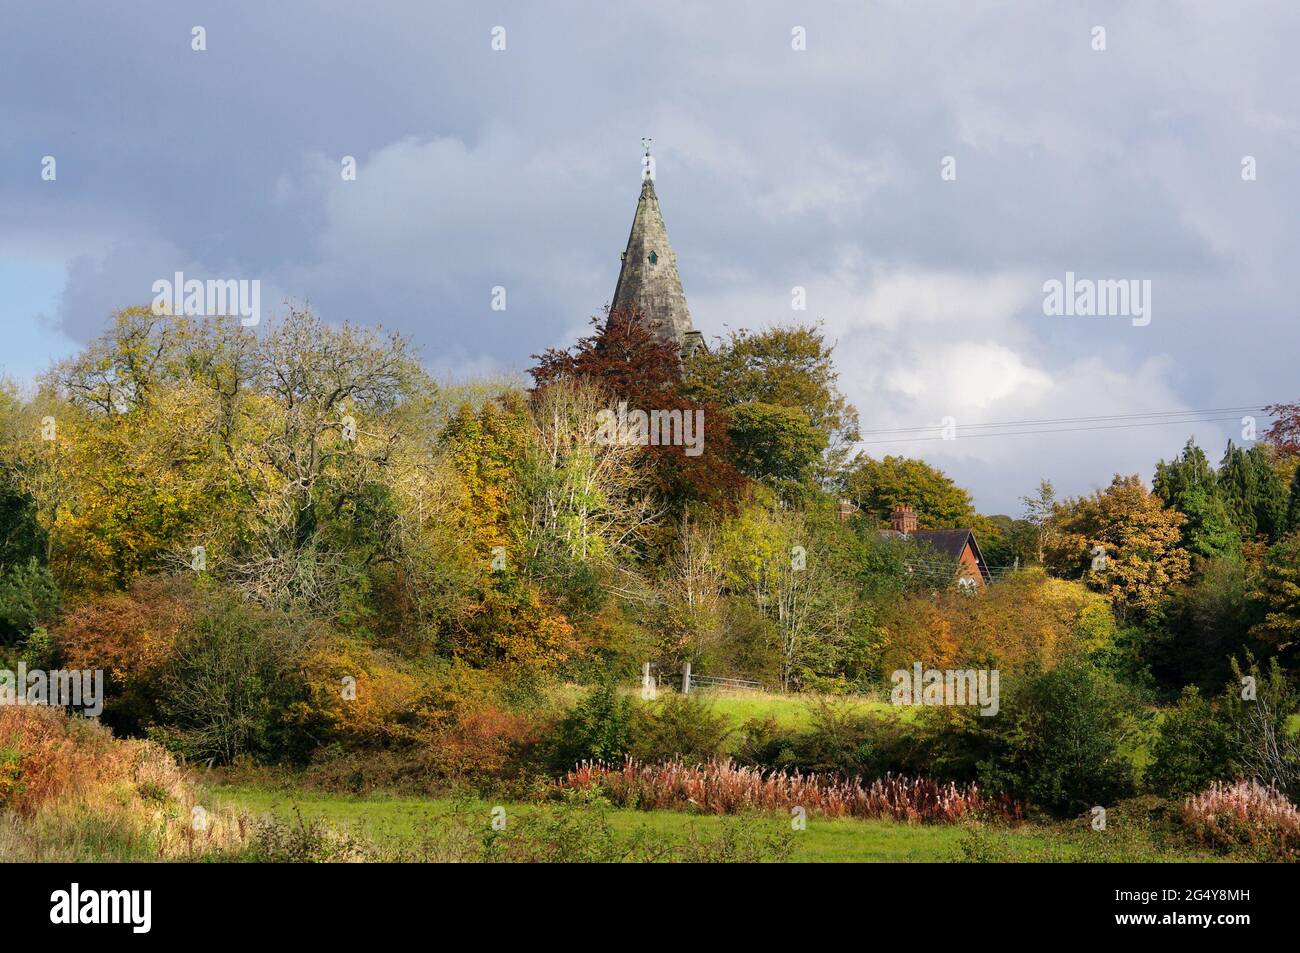 St Chad's Church in Longsdon, Staffordshire. Church spire overlooking the autumn trees and fields in a rural idyll. Stock Photo